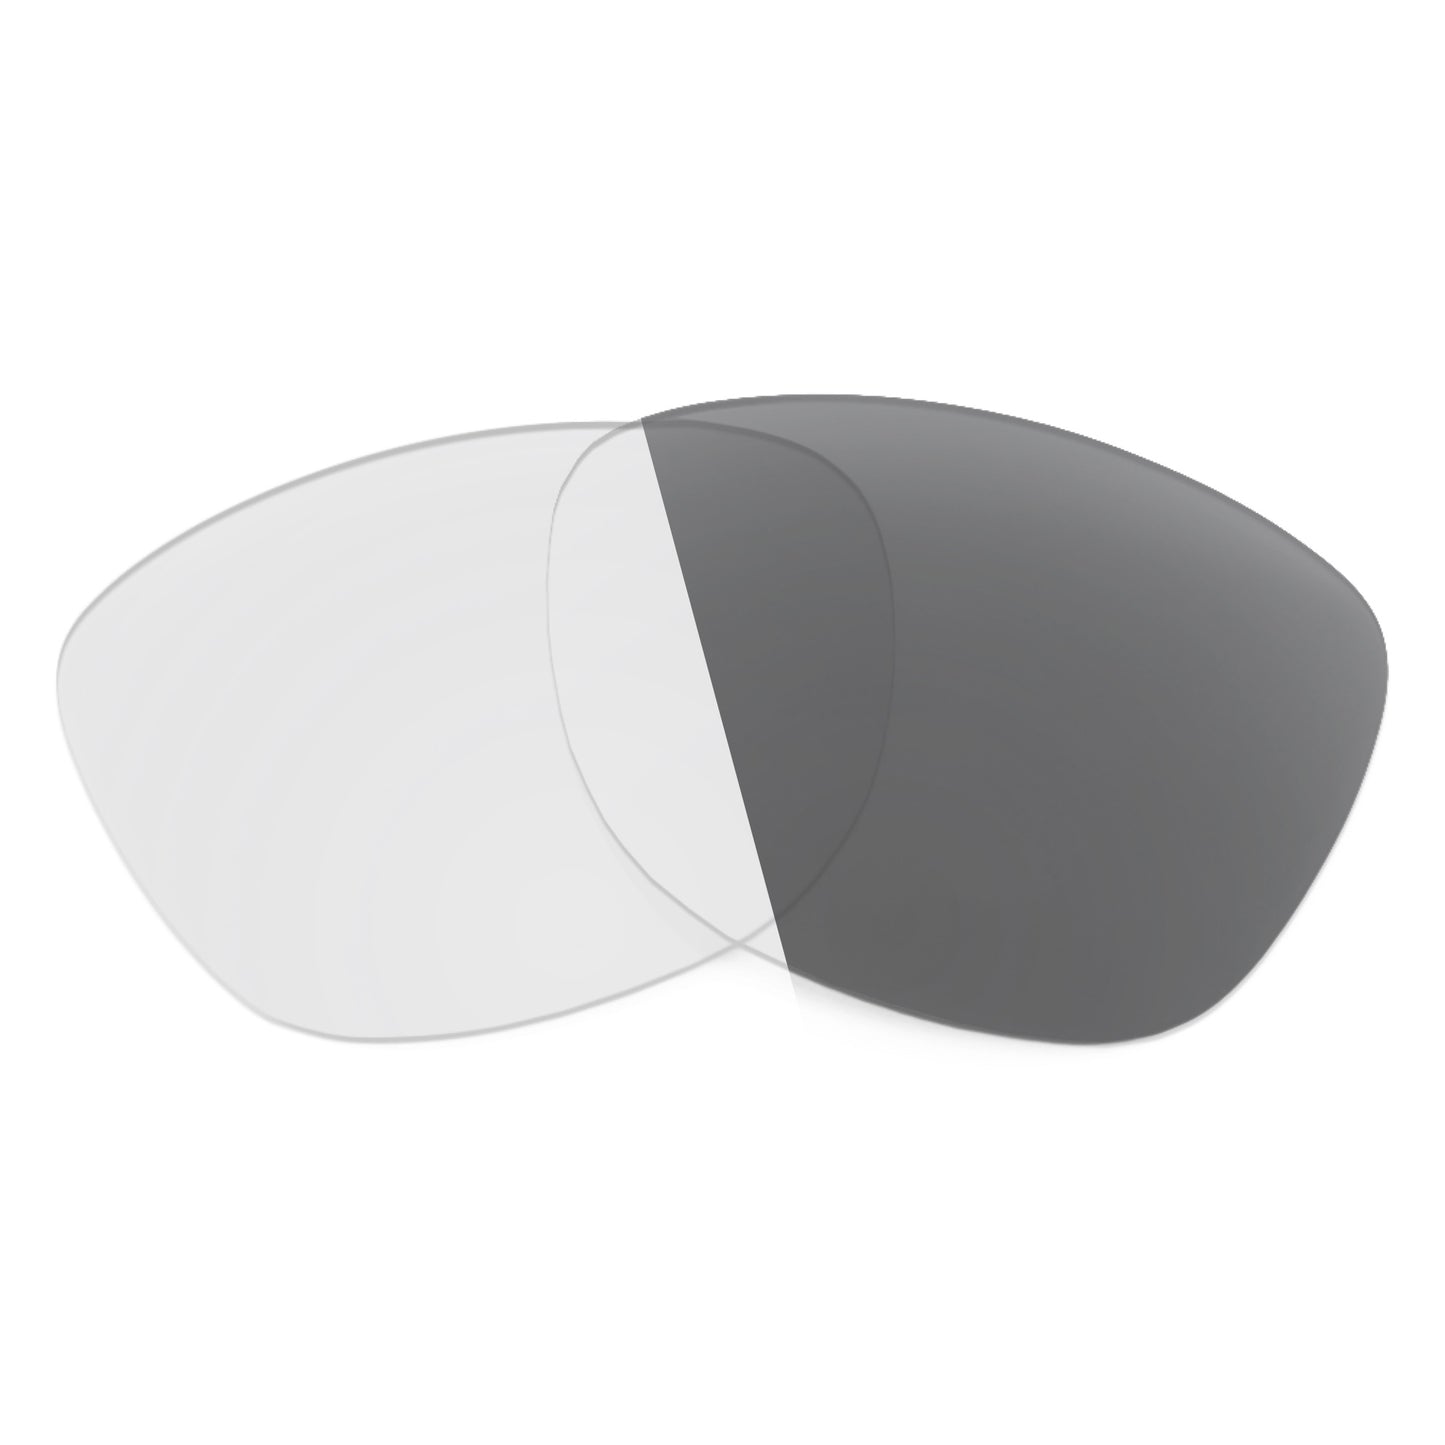 Revant replacement lenses for Ray-Ban RB4344 56mm Non-Polarized Adapt Gray Photochromic